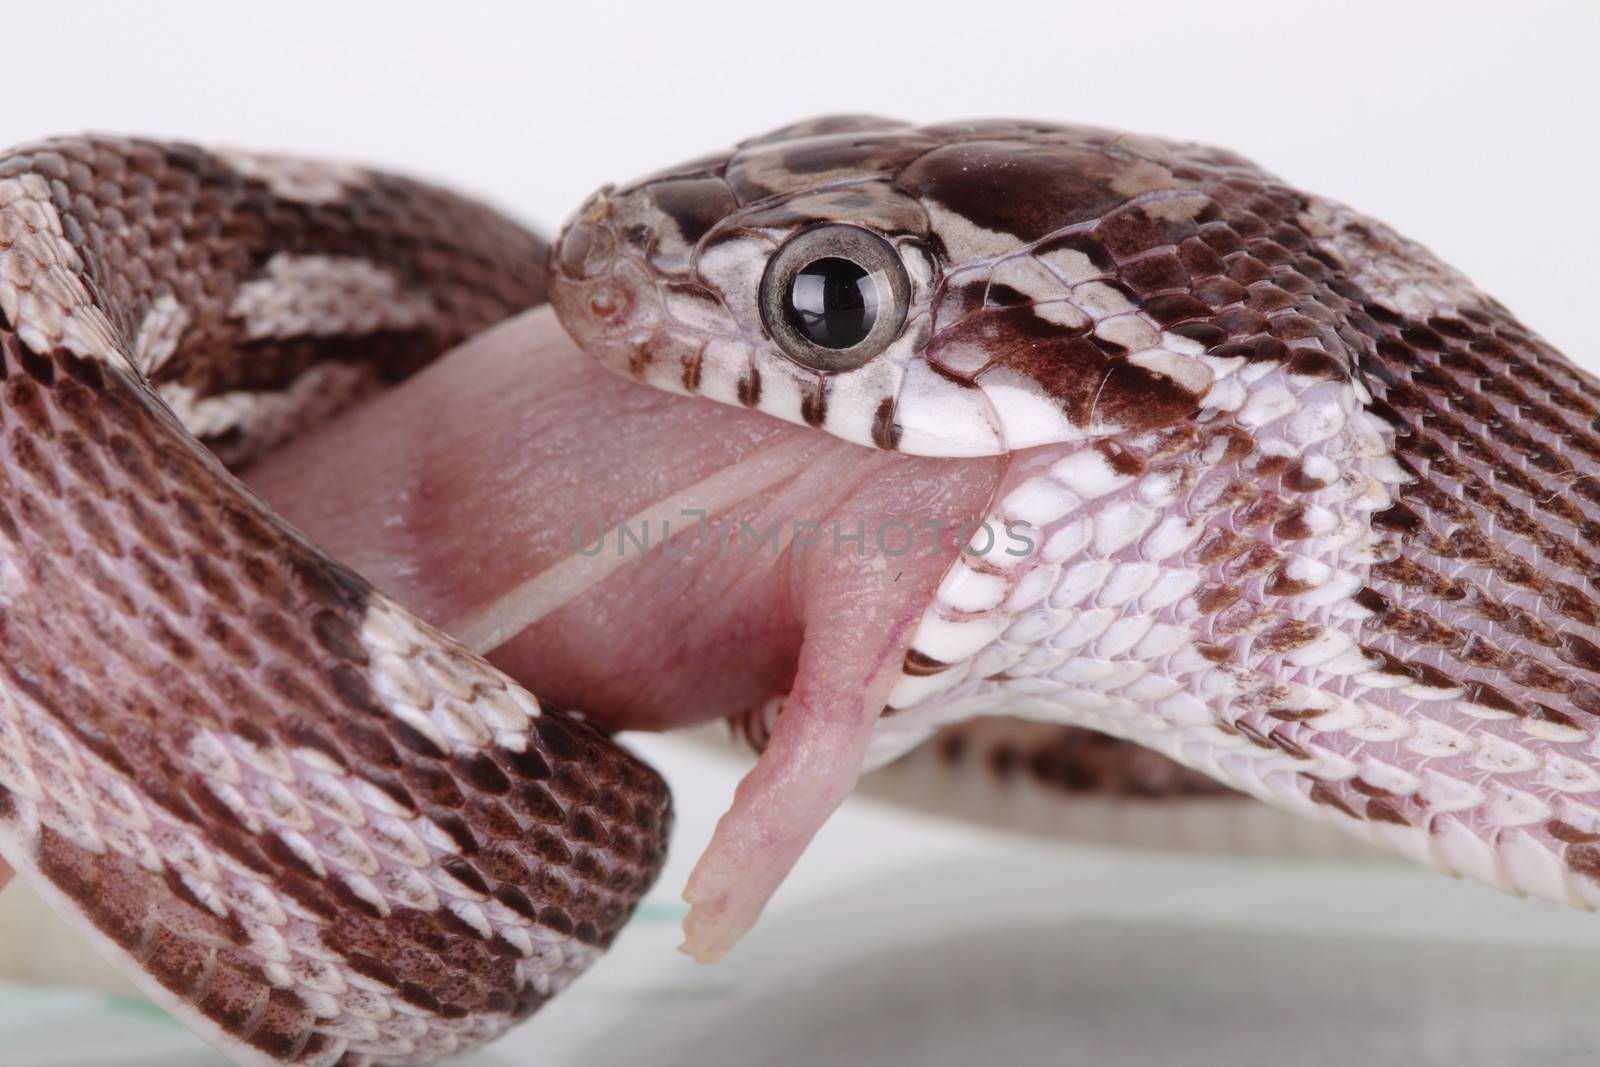 a great corn snake eating a little mouse 